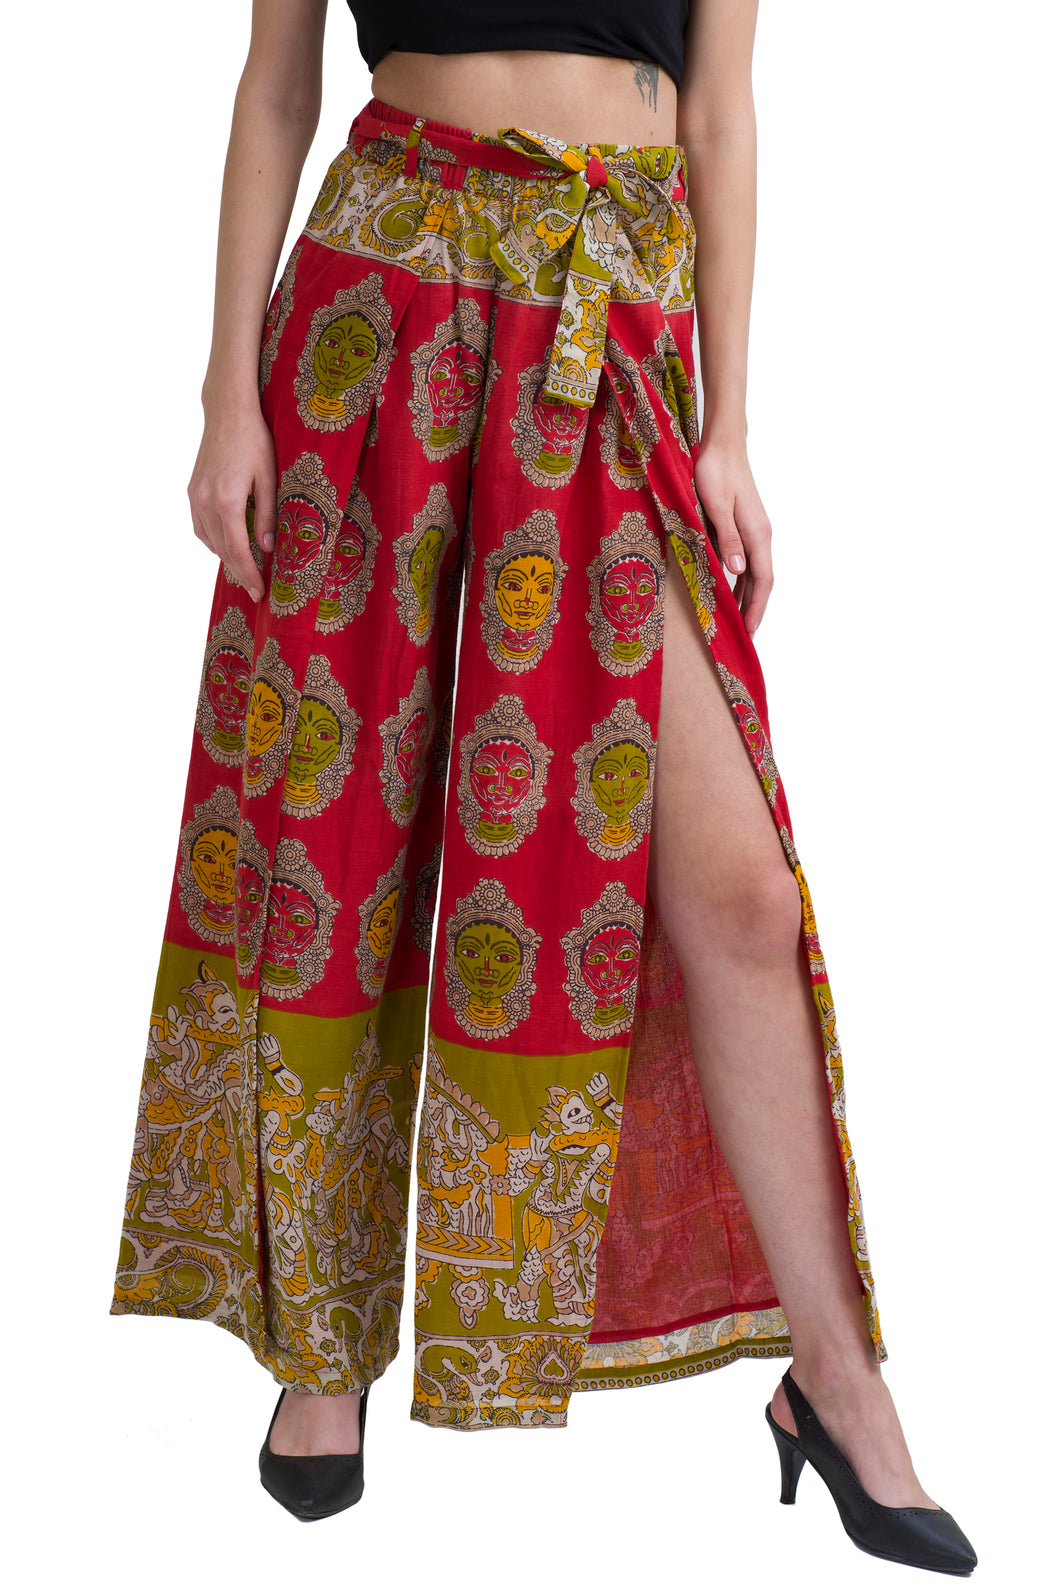 Sanskriti Vintage Wrap Style Palazzo Pant Pure Cotton Printed, Upcycled S Size